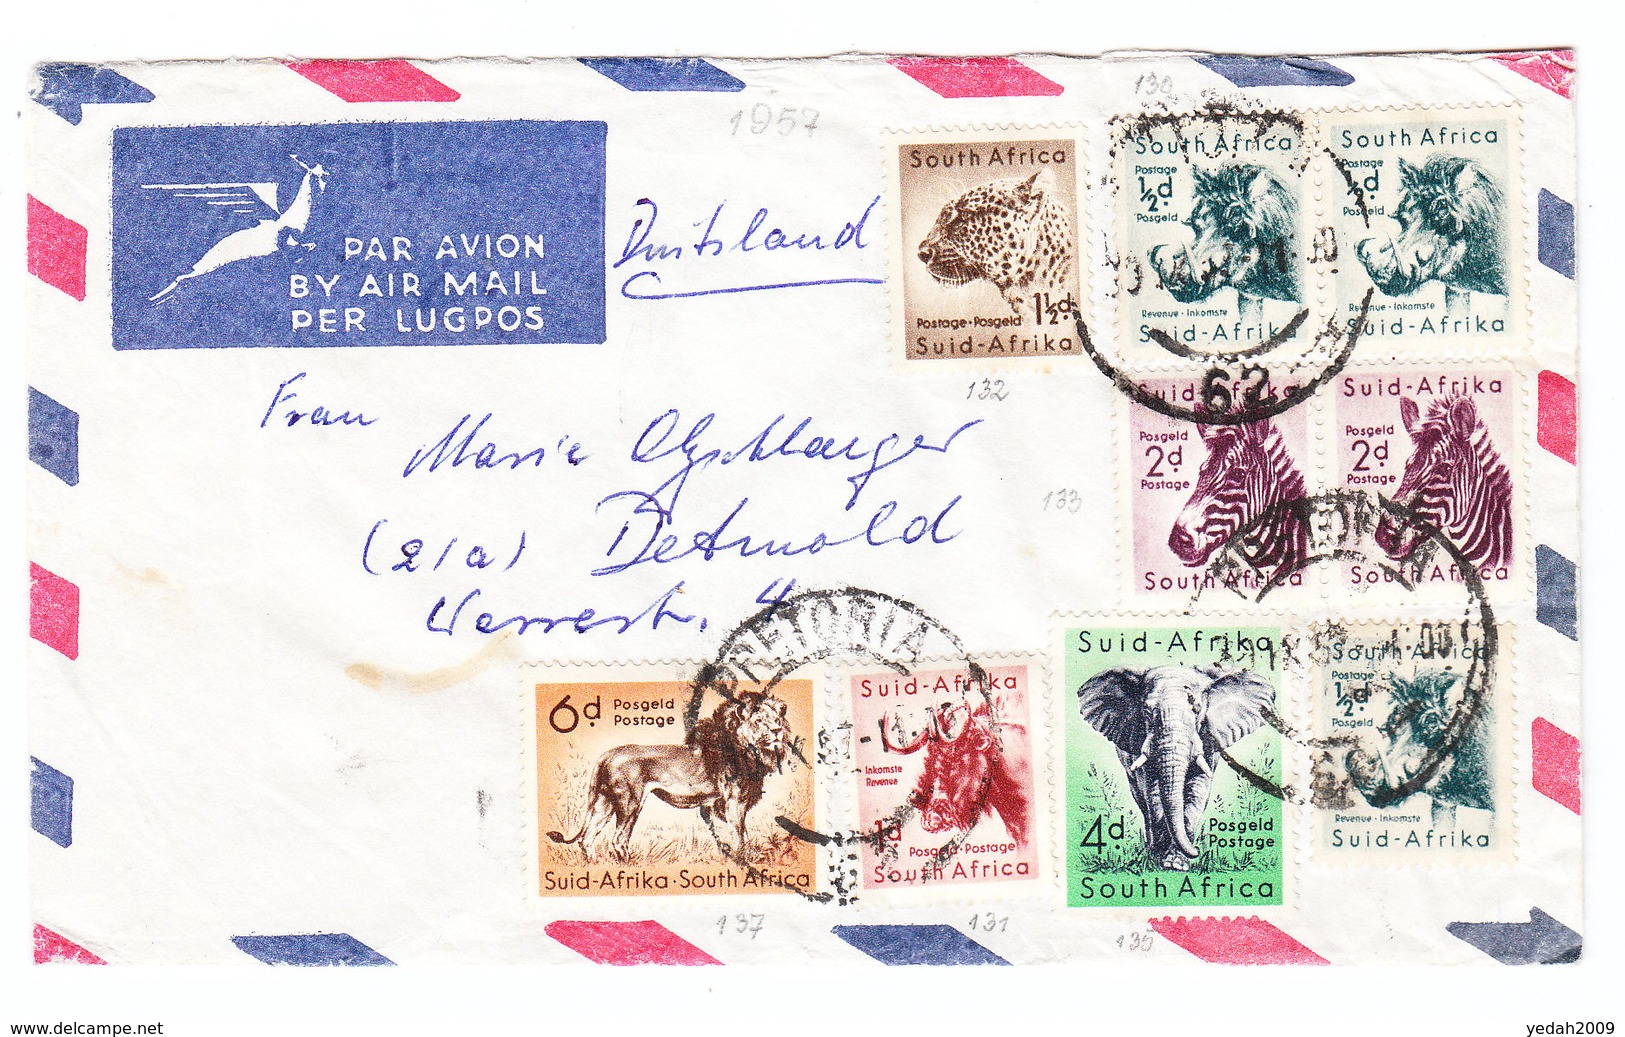 South Africa AIRMAIL COVER TO Germany 1957 - Posta Aerea